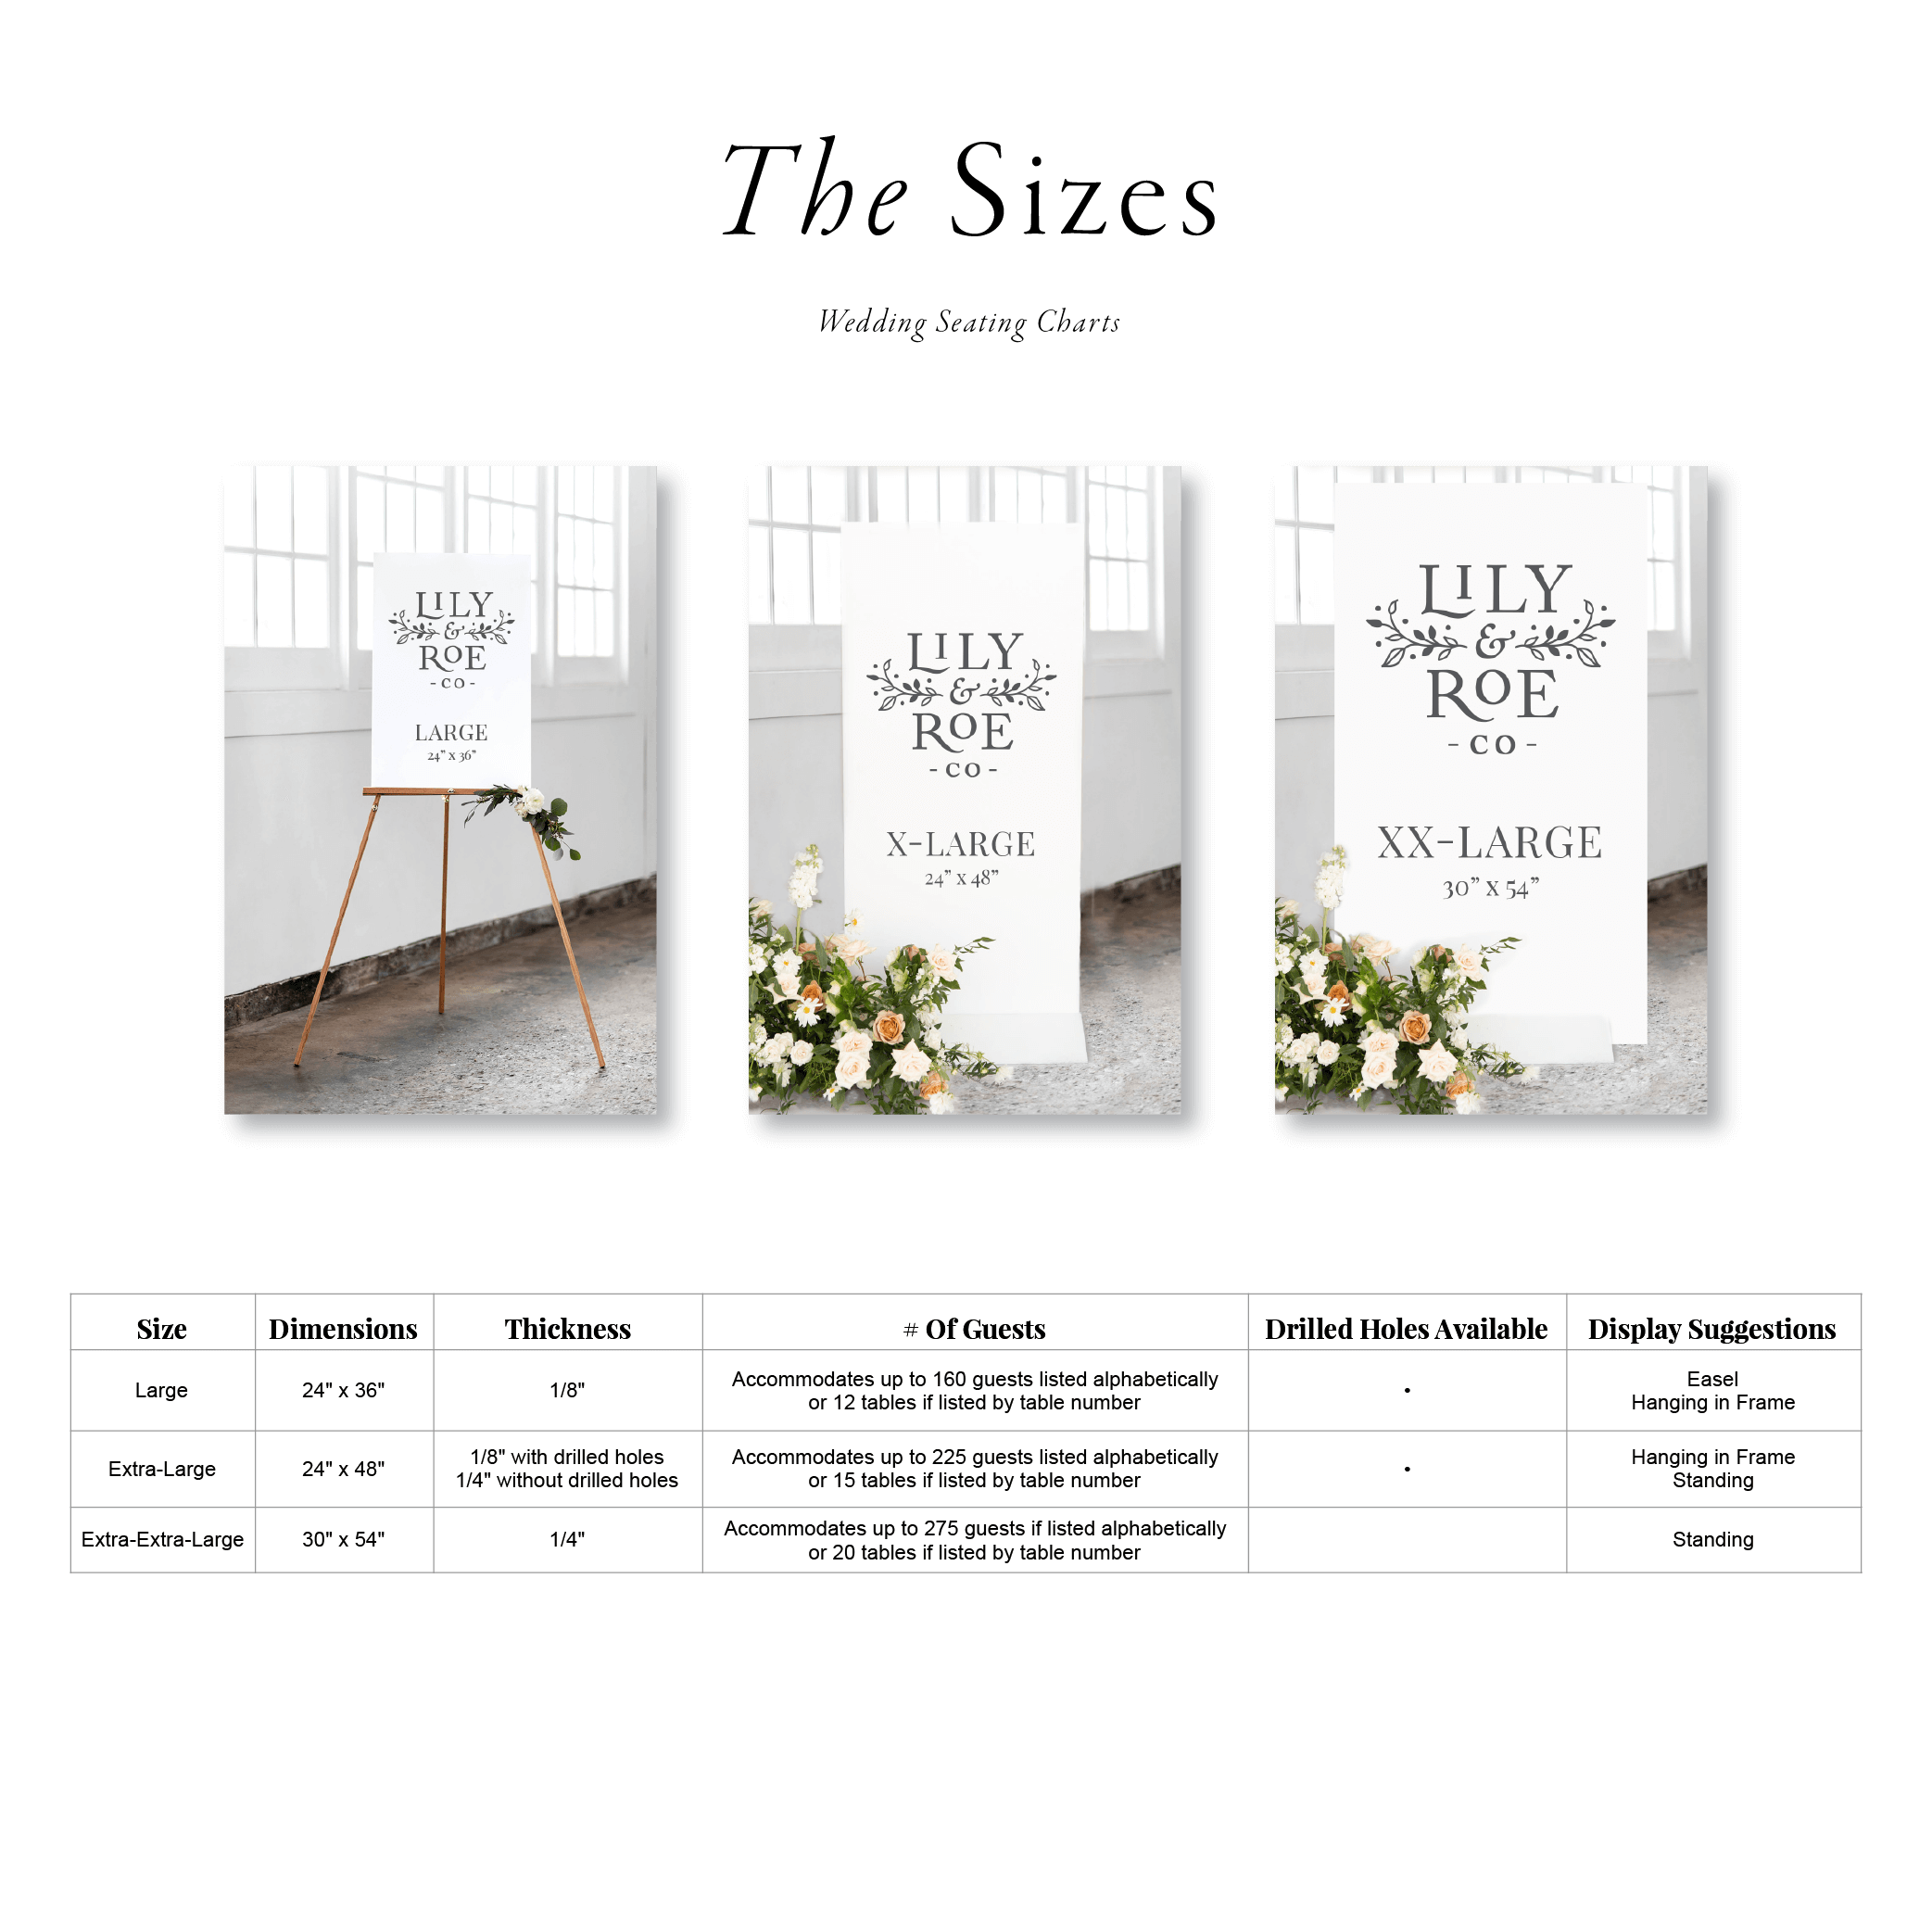 Wexel Art on Instagram: Elevate your love story with the perfect  personalized acrylic sign. Create a stylish welcome sign or seating chart  onto our single sheet of acrylic for your modern wedding!